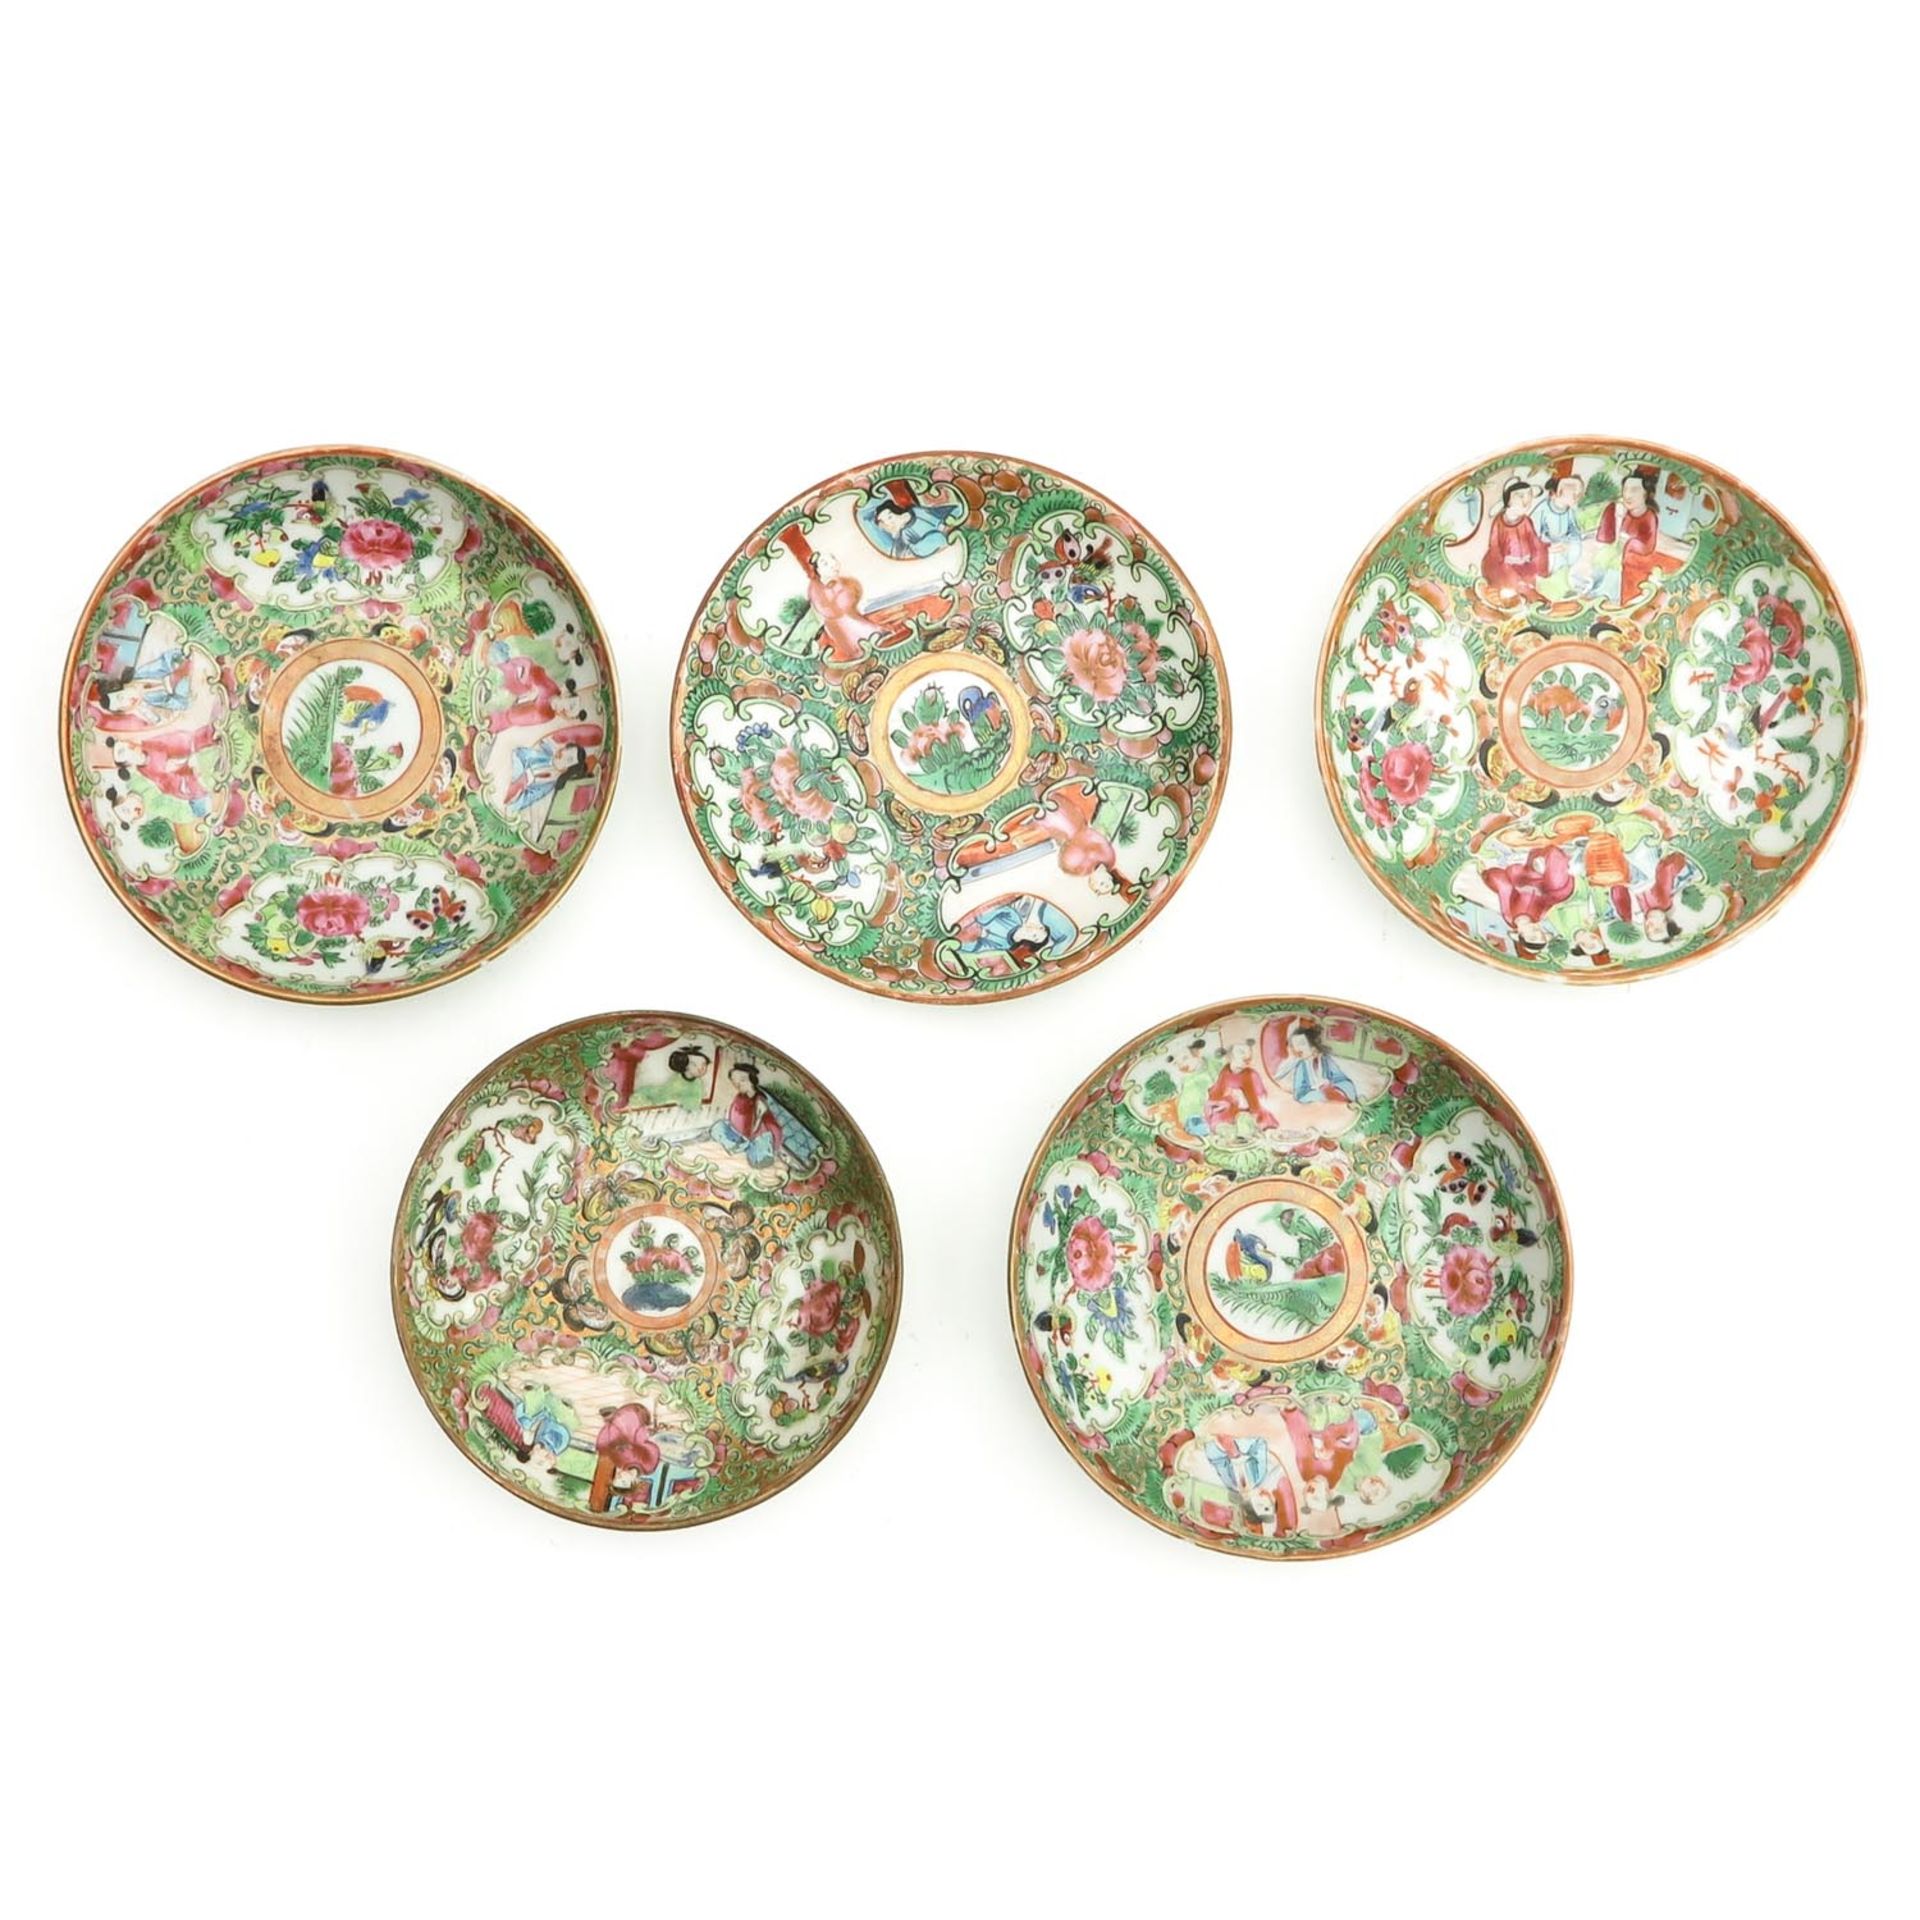 A Collection of 10 Small Cantonese Plates - Image 5 of 10